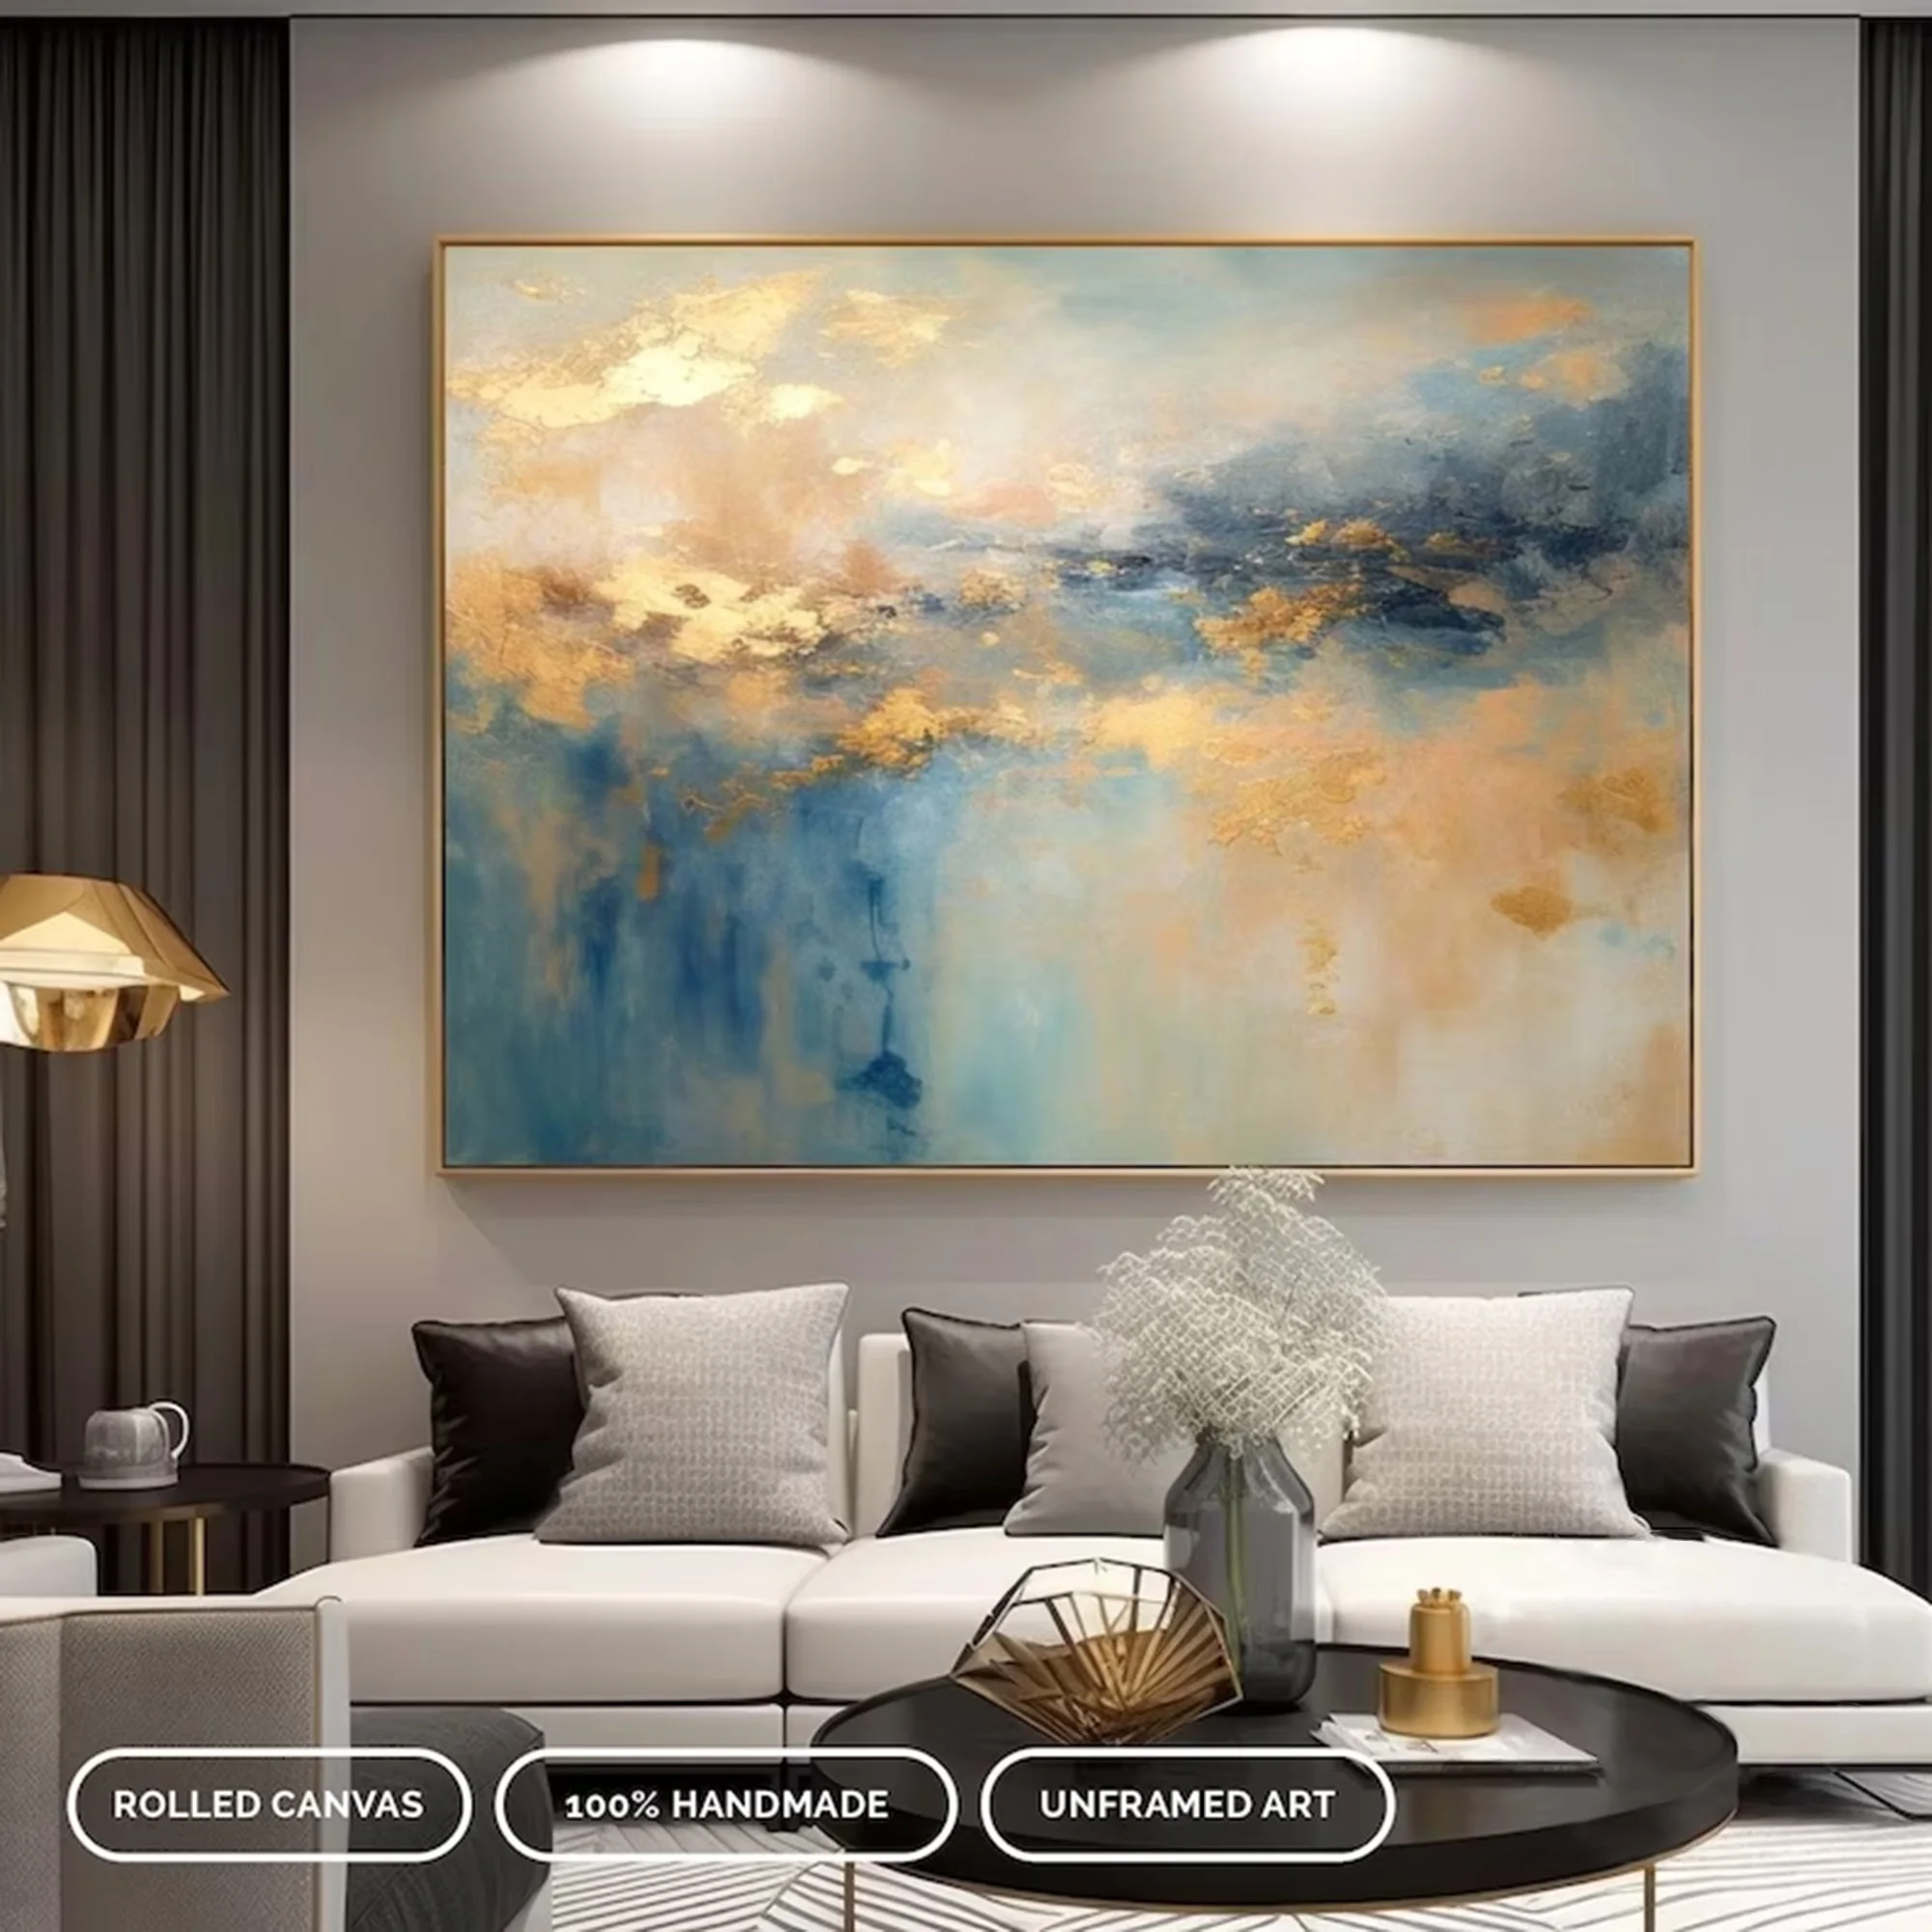 

Professional Handmade gold foil abstract oil painting on canvas Unframed customized posters for wall room decor senior artwork